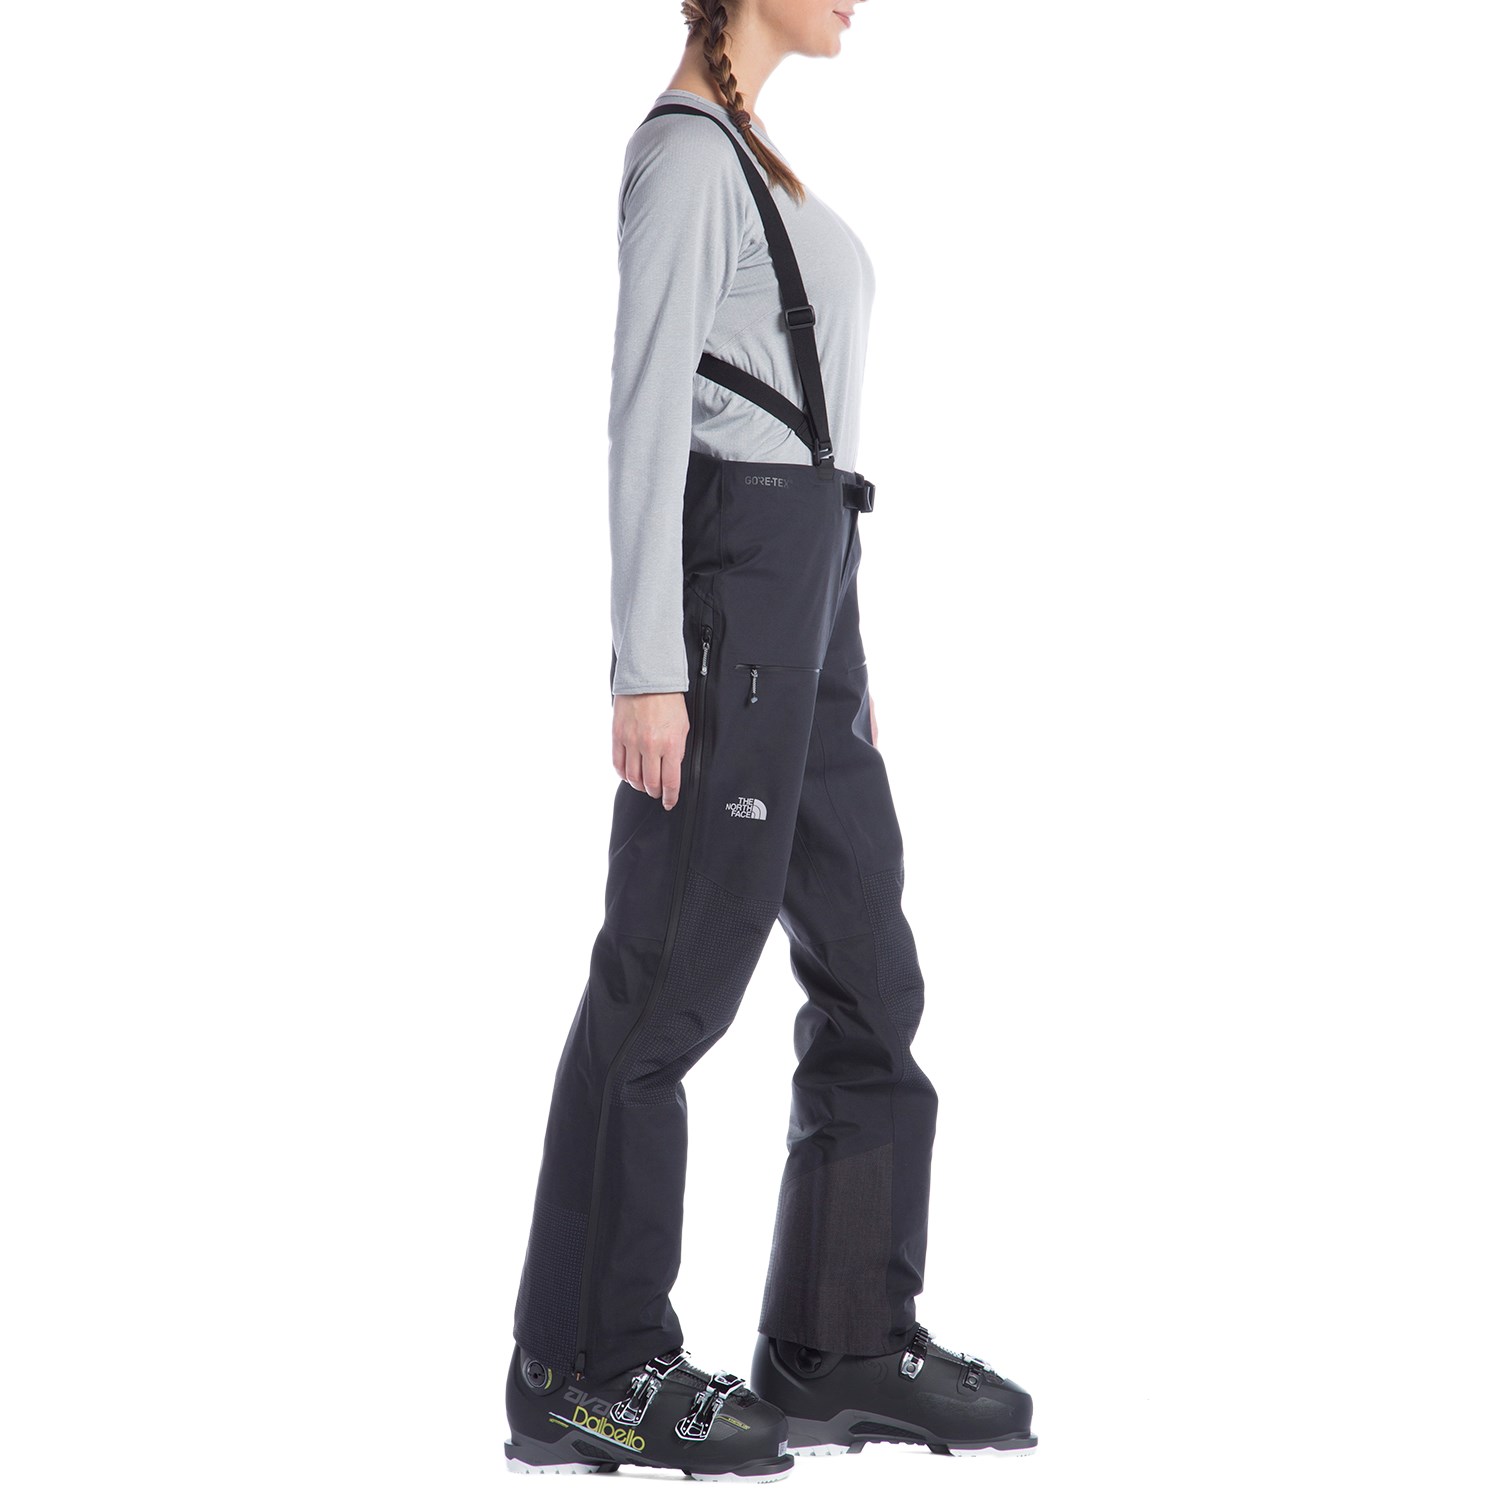 the north face summit pants